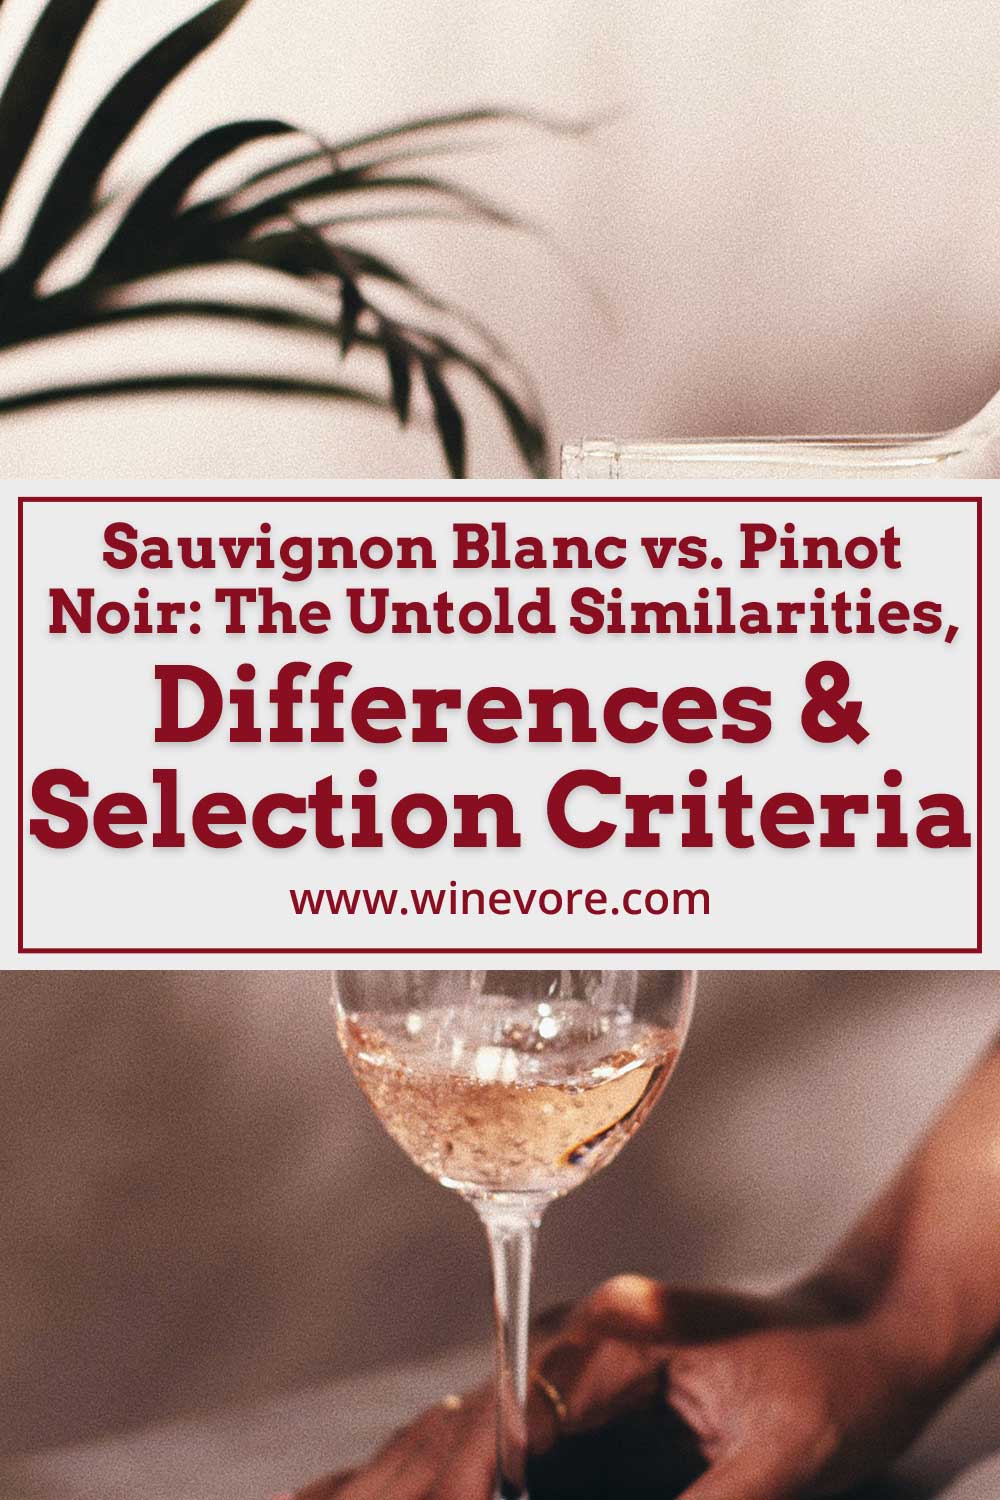 Bottom of a glass of wine held by a hand - Tempranillo vs Pinot Noir: Similarities, Differences & Selection Criteria